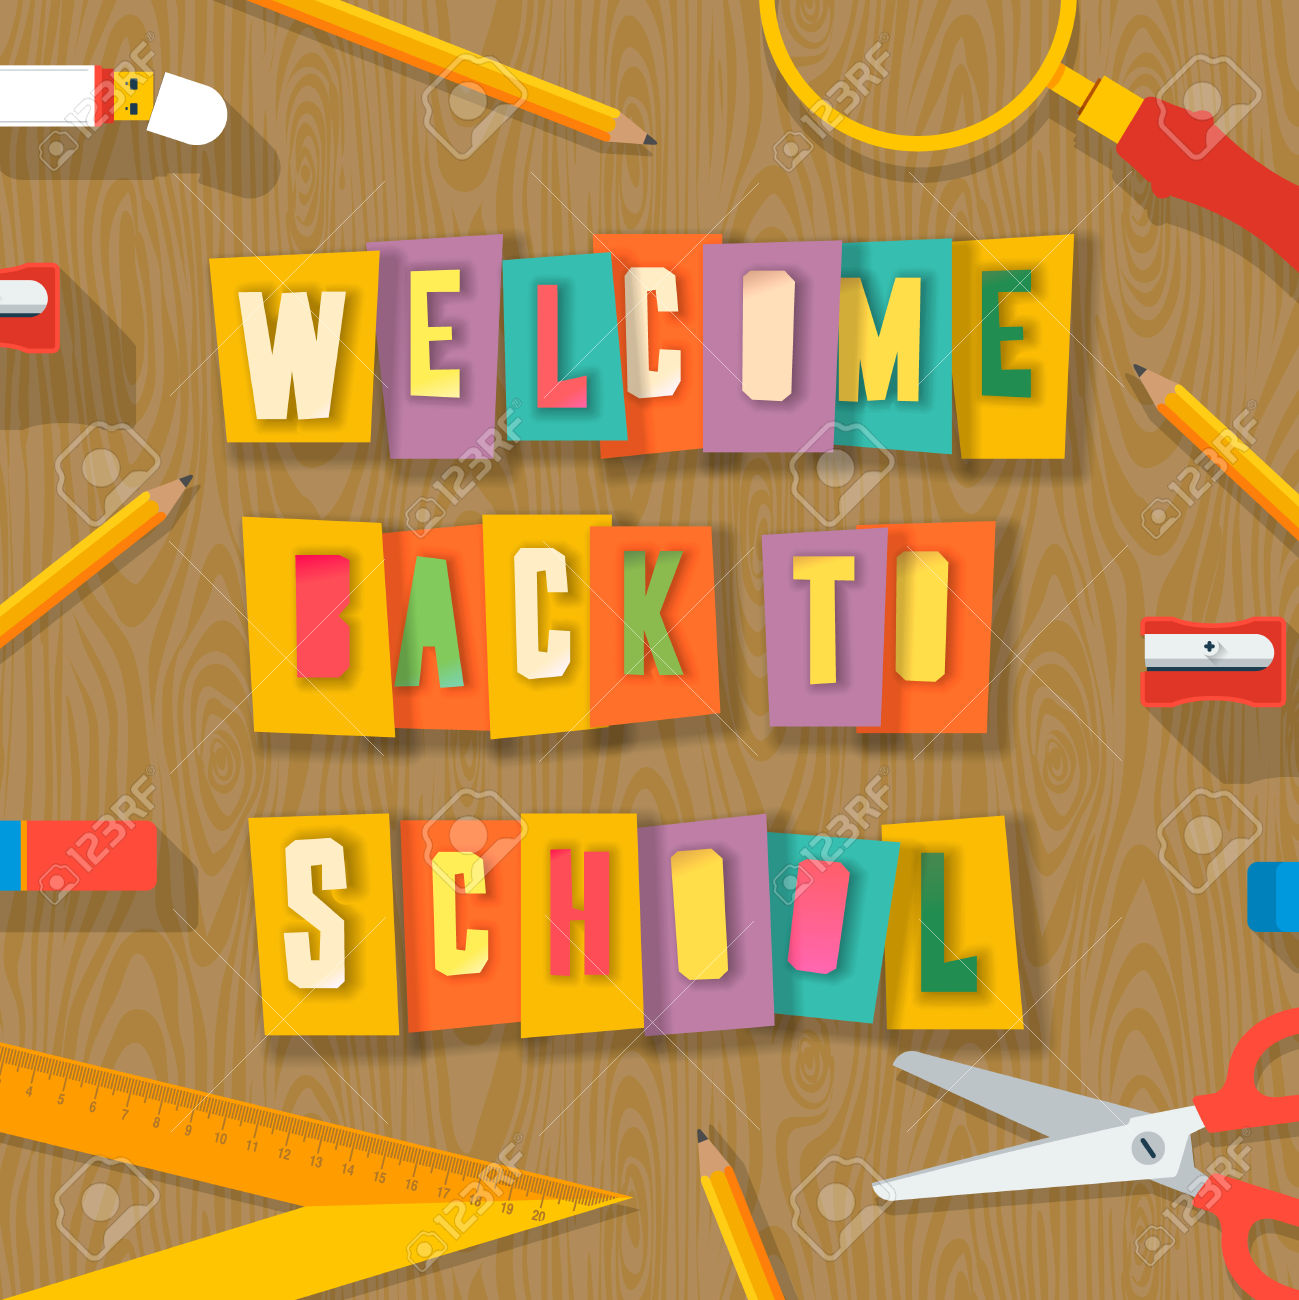 Welcome Back To School Beautiful Picture